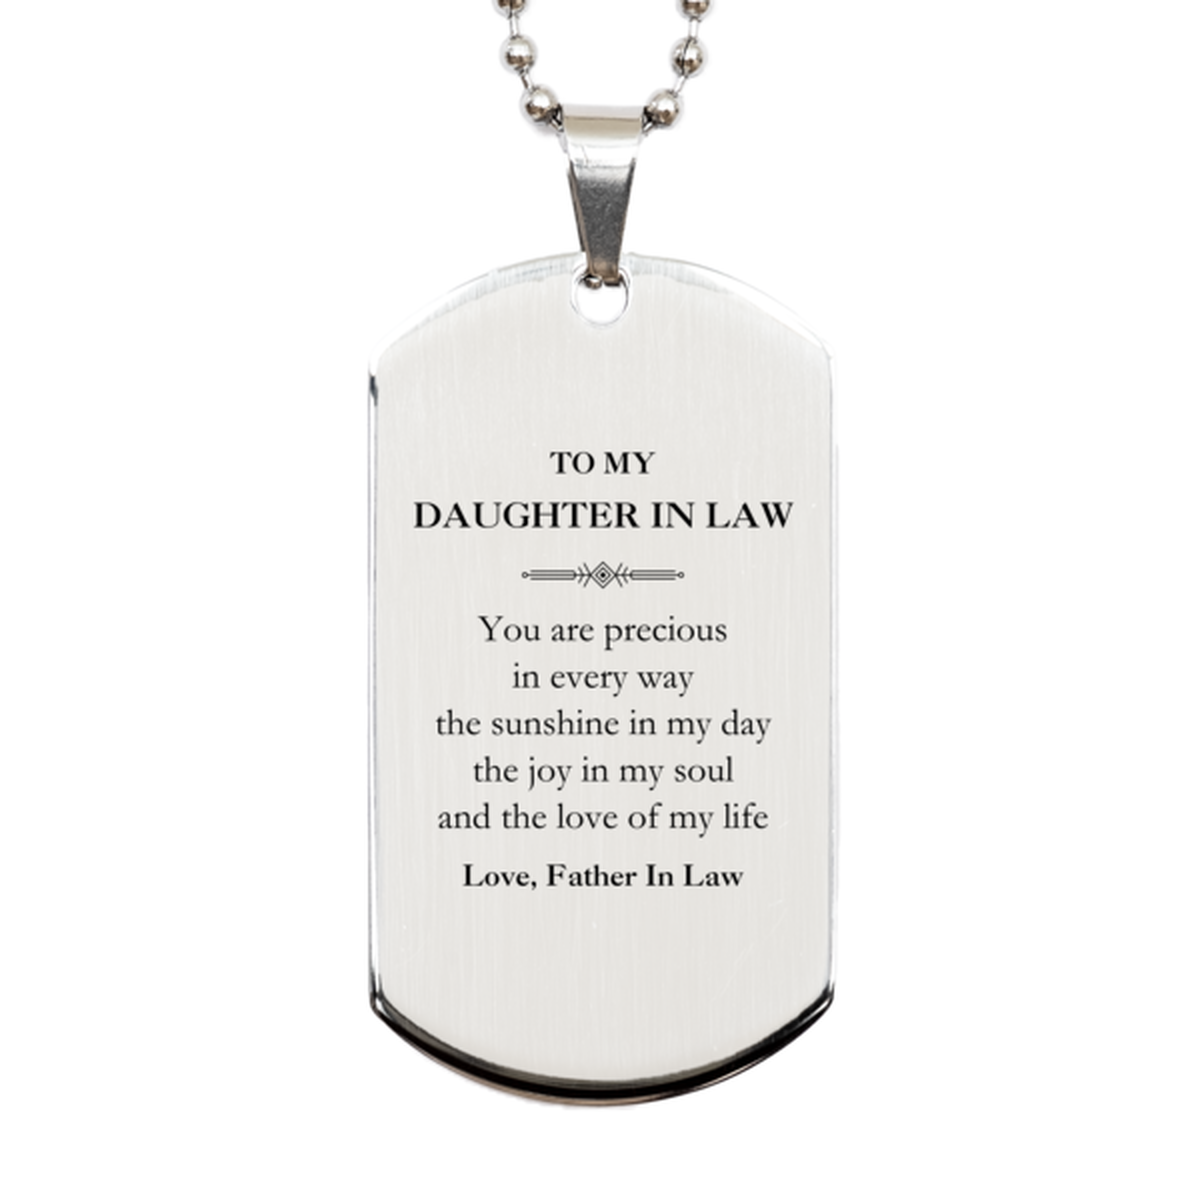 Graduation Gifts for Daughter In Law Silver Dog Tag Present from Father In Law, Christmas Daughter In Law Birthday Gifts Daughter In Law You are precious in every way the sunshine in my day. Love, Father In Law